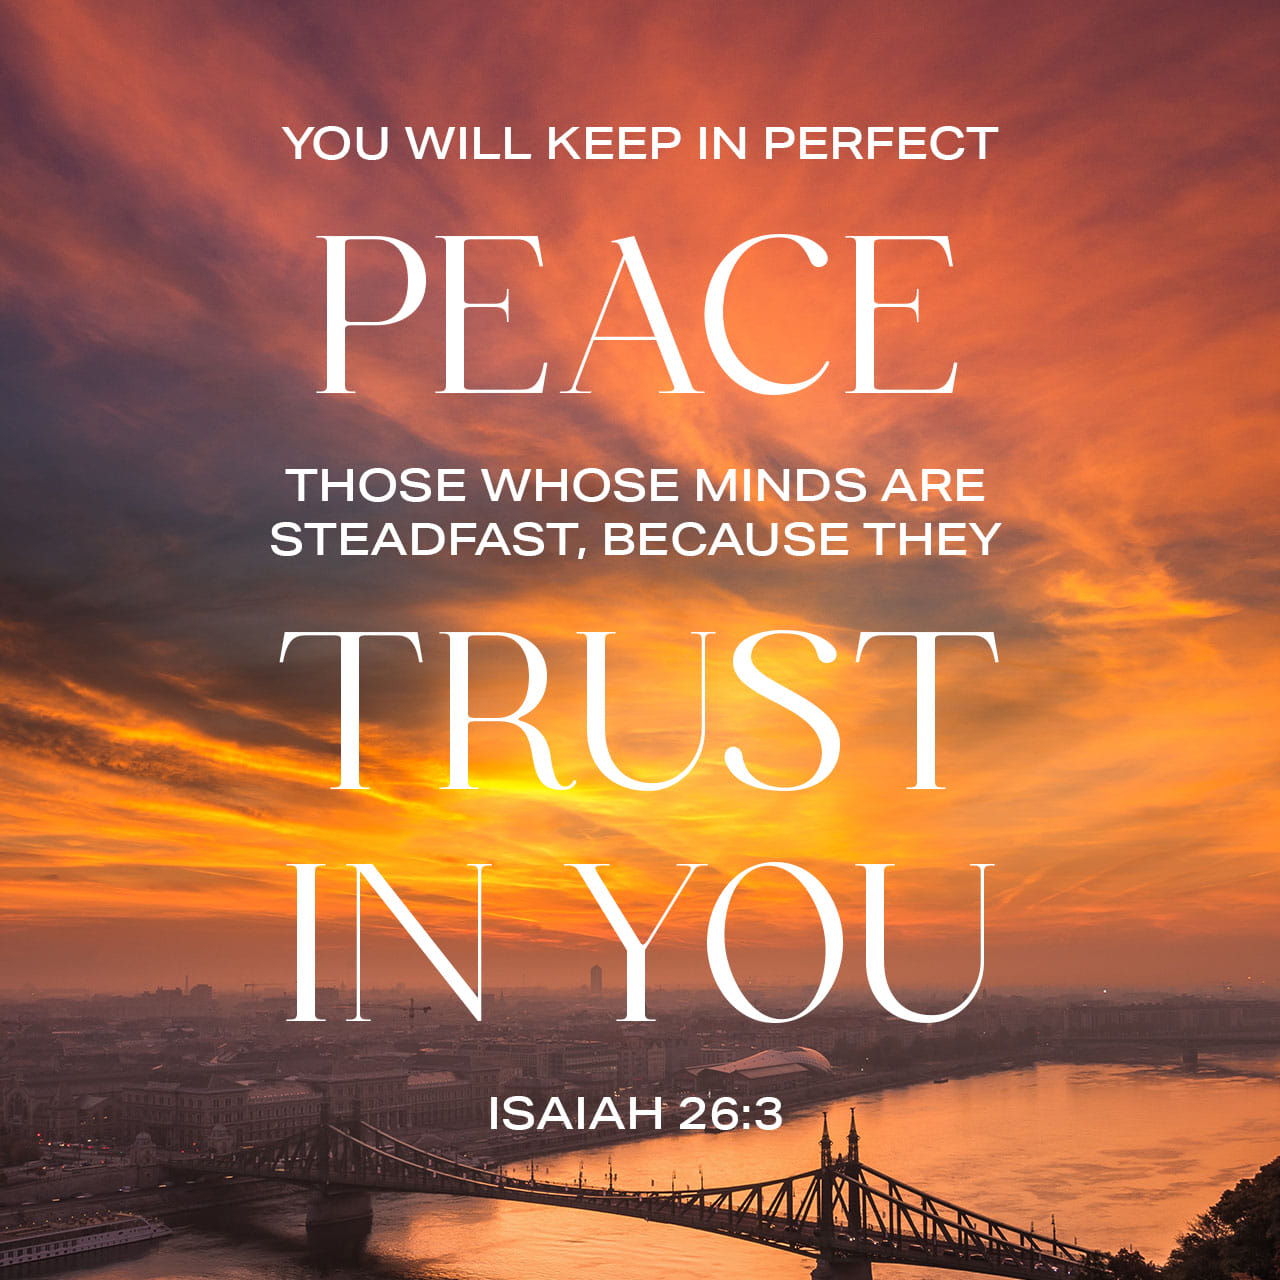 Isaiah 26:3 Thou wilt keep him in perfect peace, whose mind is stayed on thee: because he trusteth in thee. | King James Version (KJV) | Download The Bible App Now